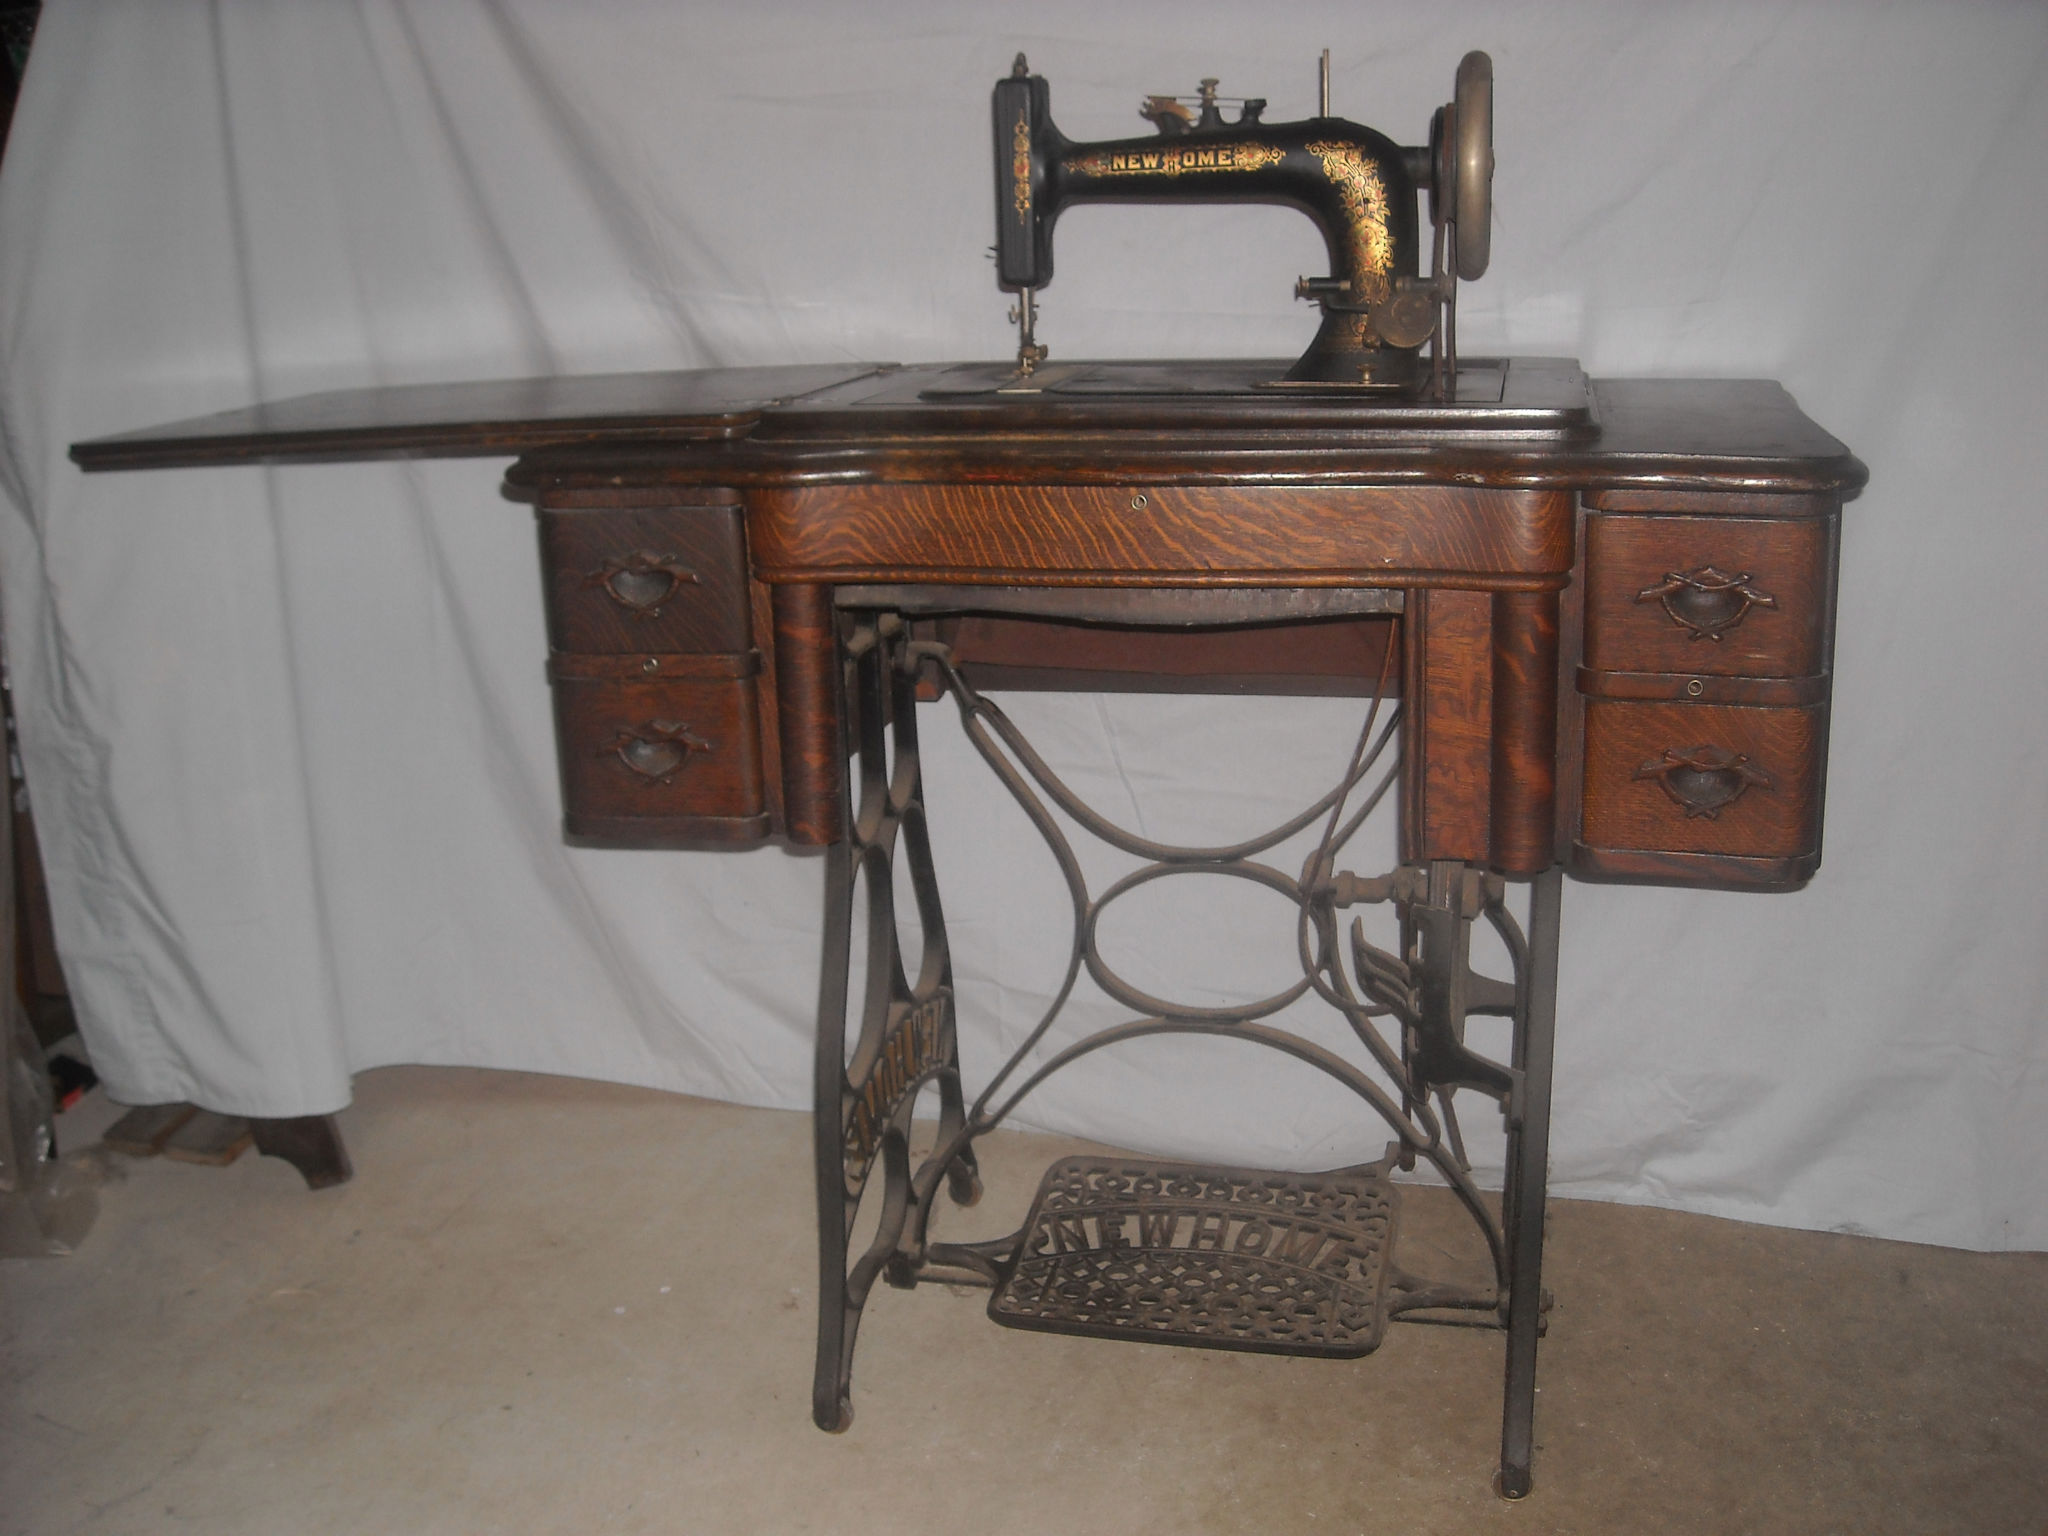 New Home 1912 Treadle. - Quiltingboard Forums